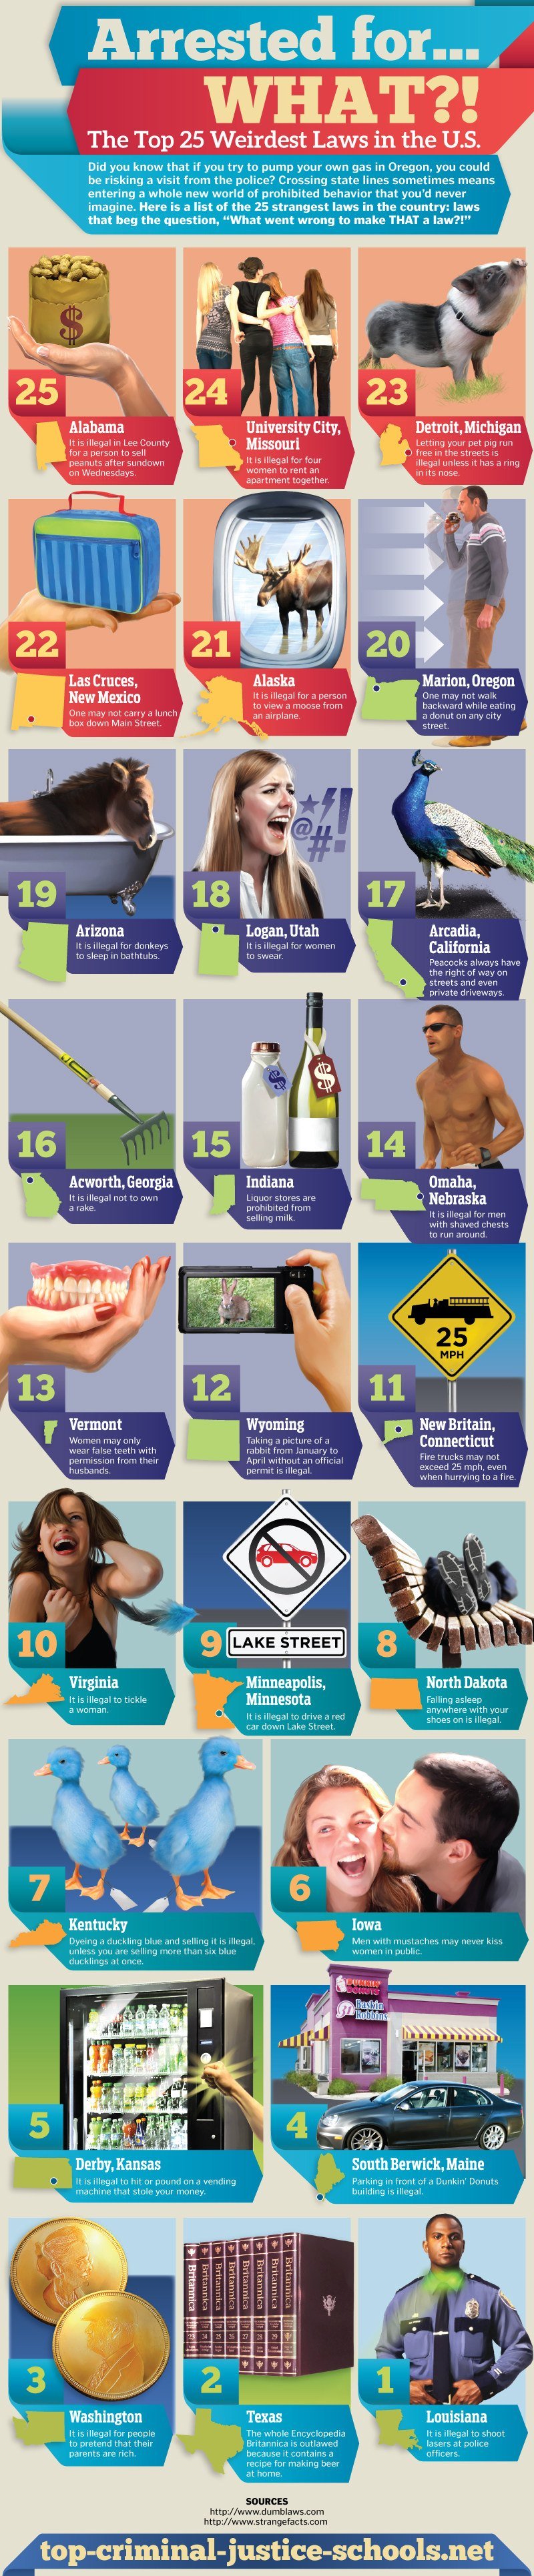 The Top 25 Weirdest Laws in the US Infographic